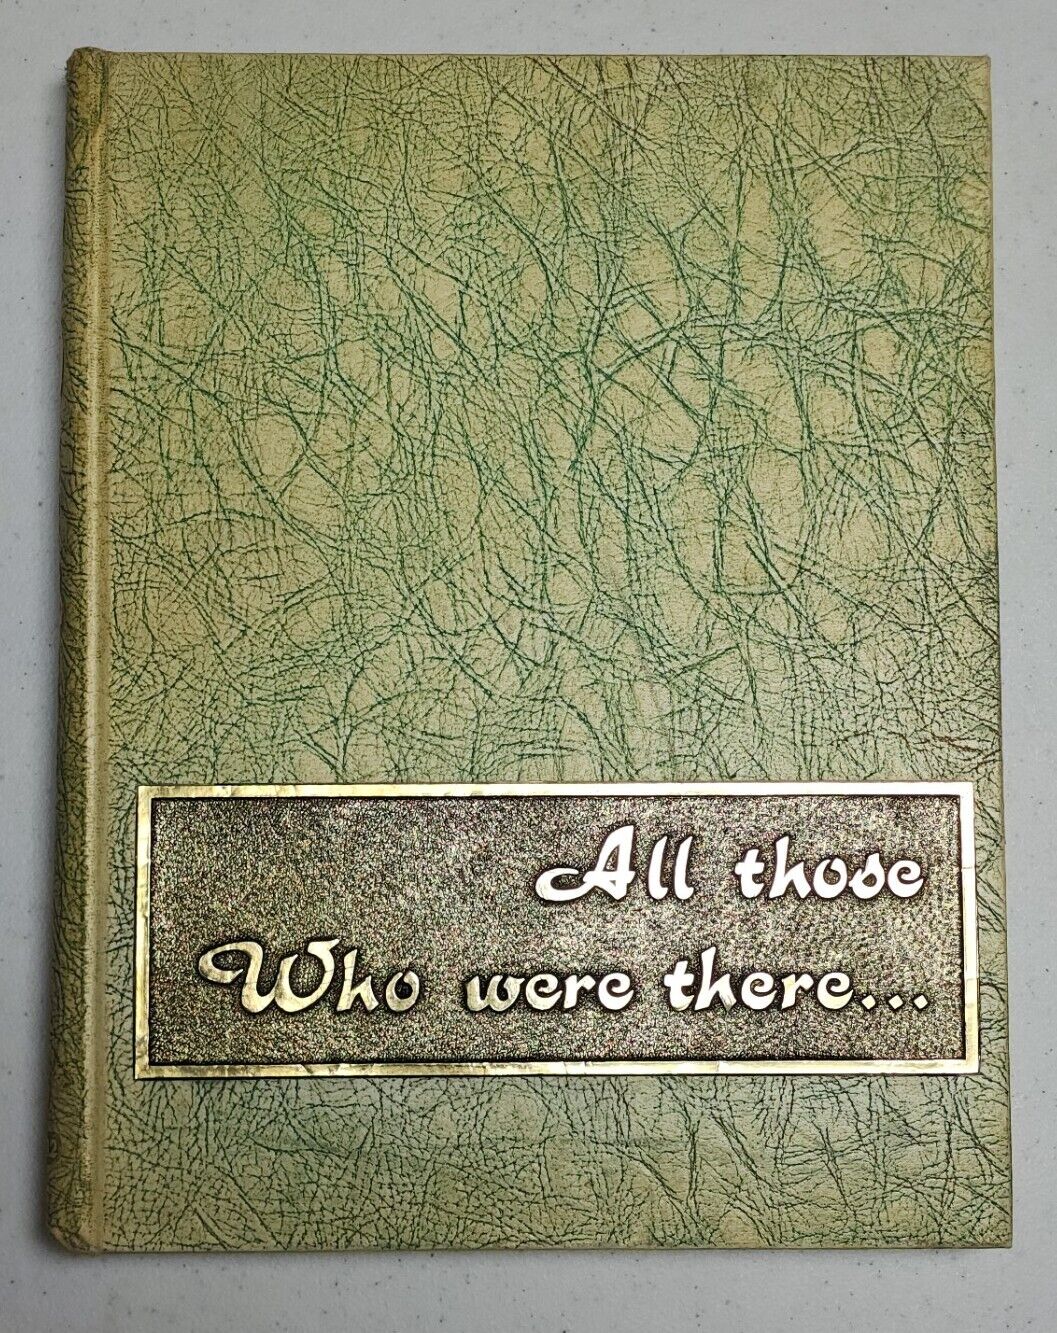 Will Rogers High School Yearbook 1972 Tulsa Oklahoma The Lariat Class 1968-1972